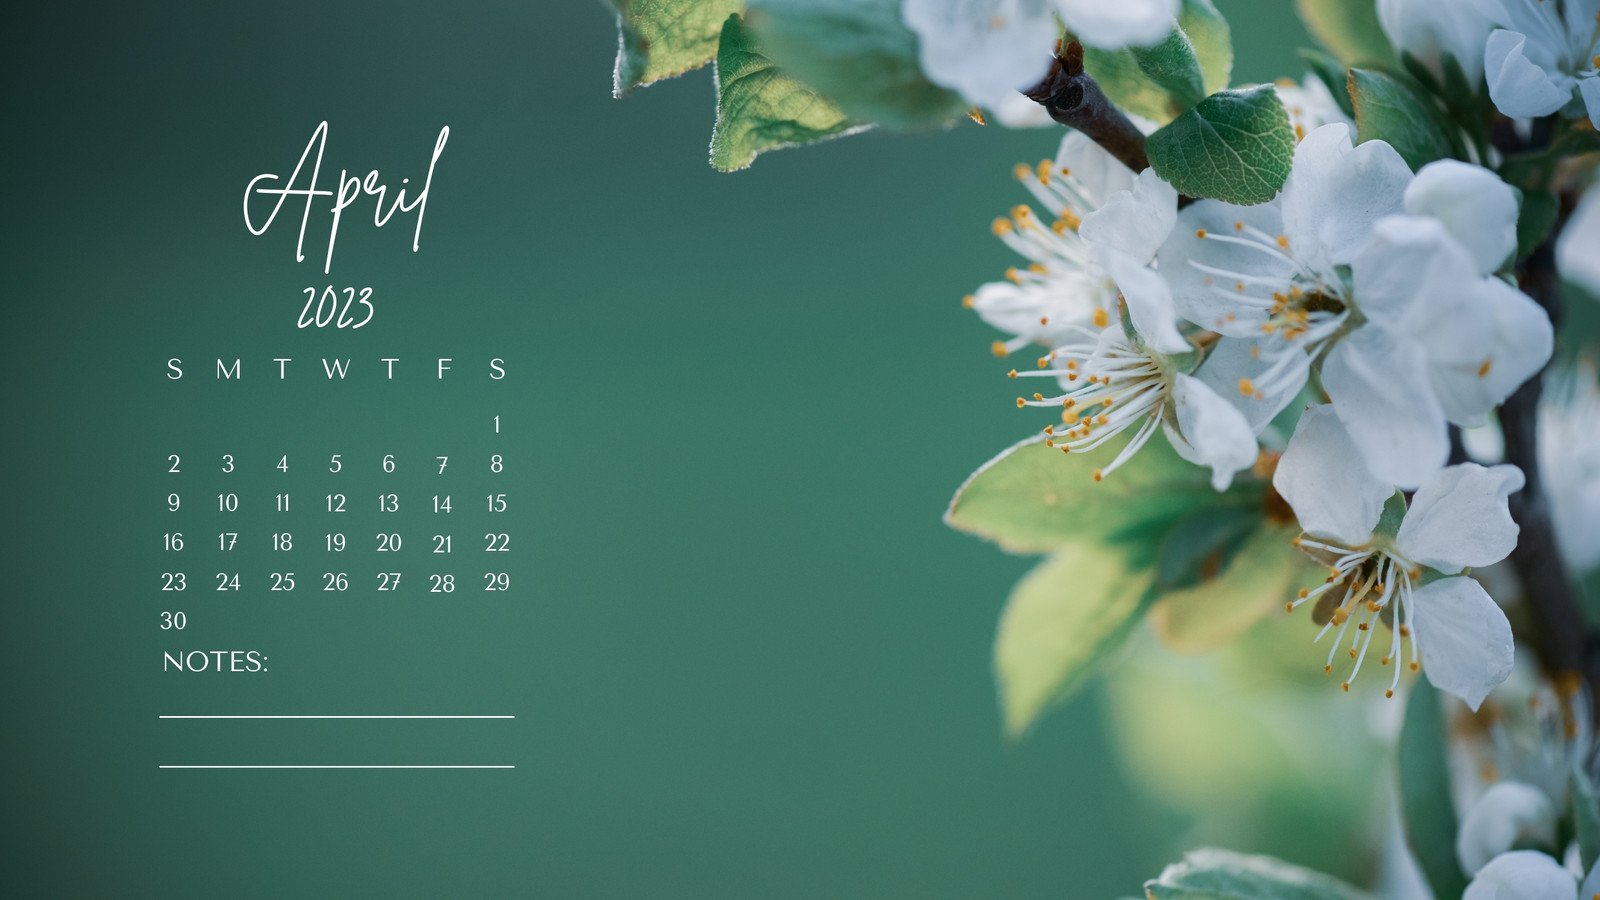 Page 2 - Free and customizable spring desktop wallpaper templates | Canva